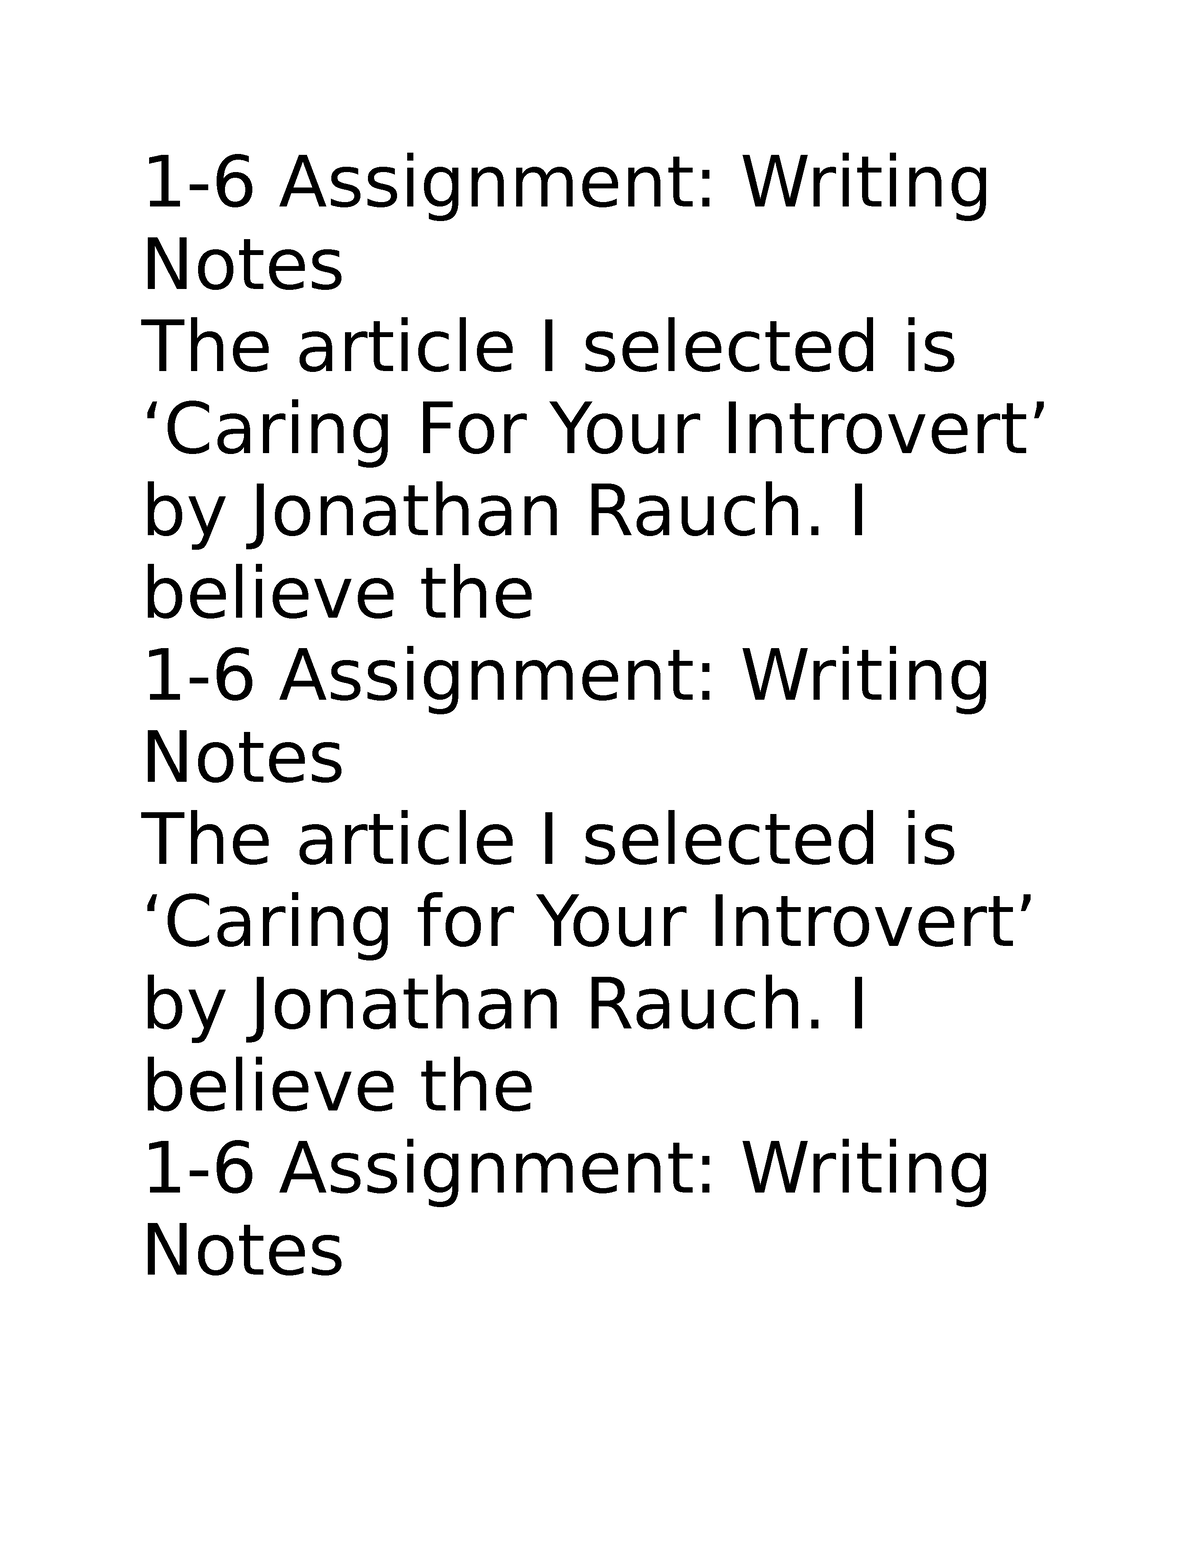 1-6 - notes - 1-6 Assignment: Writing Notes The article I selected is ...